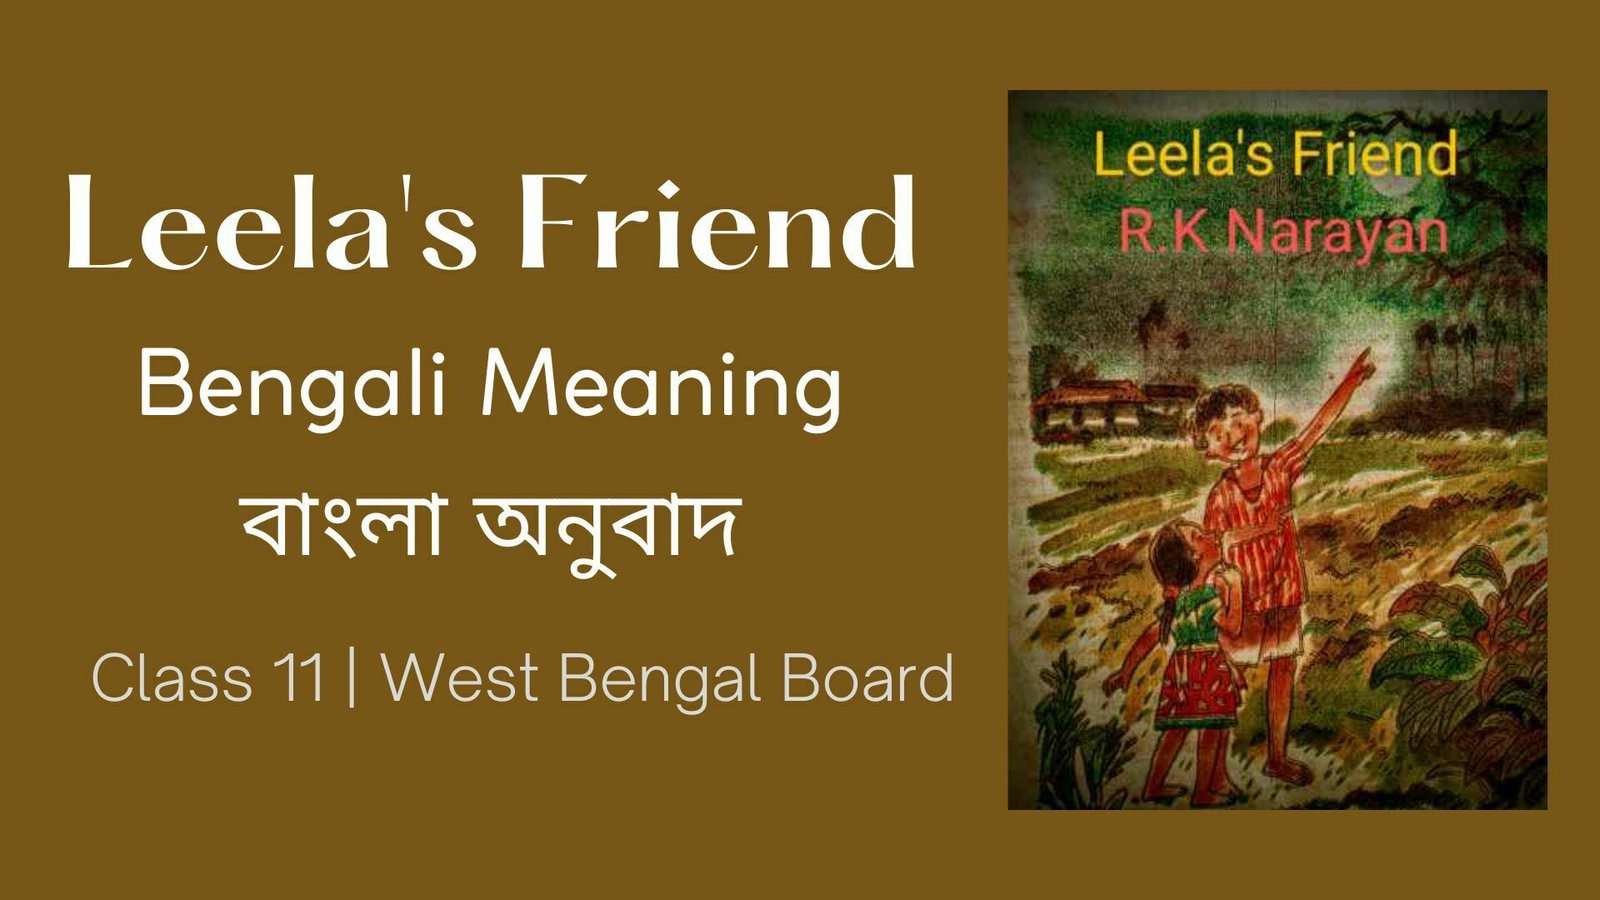 Skip Counting Meaning In Bengali